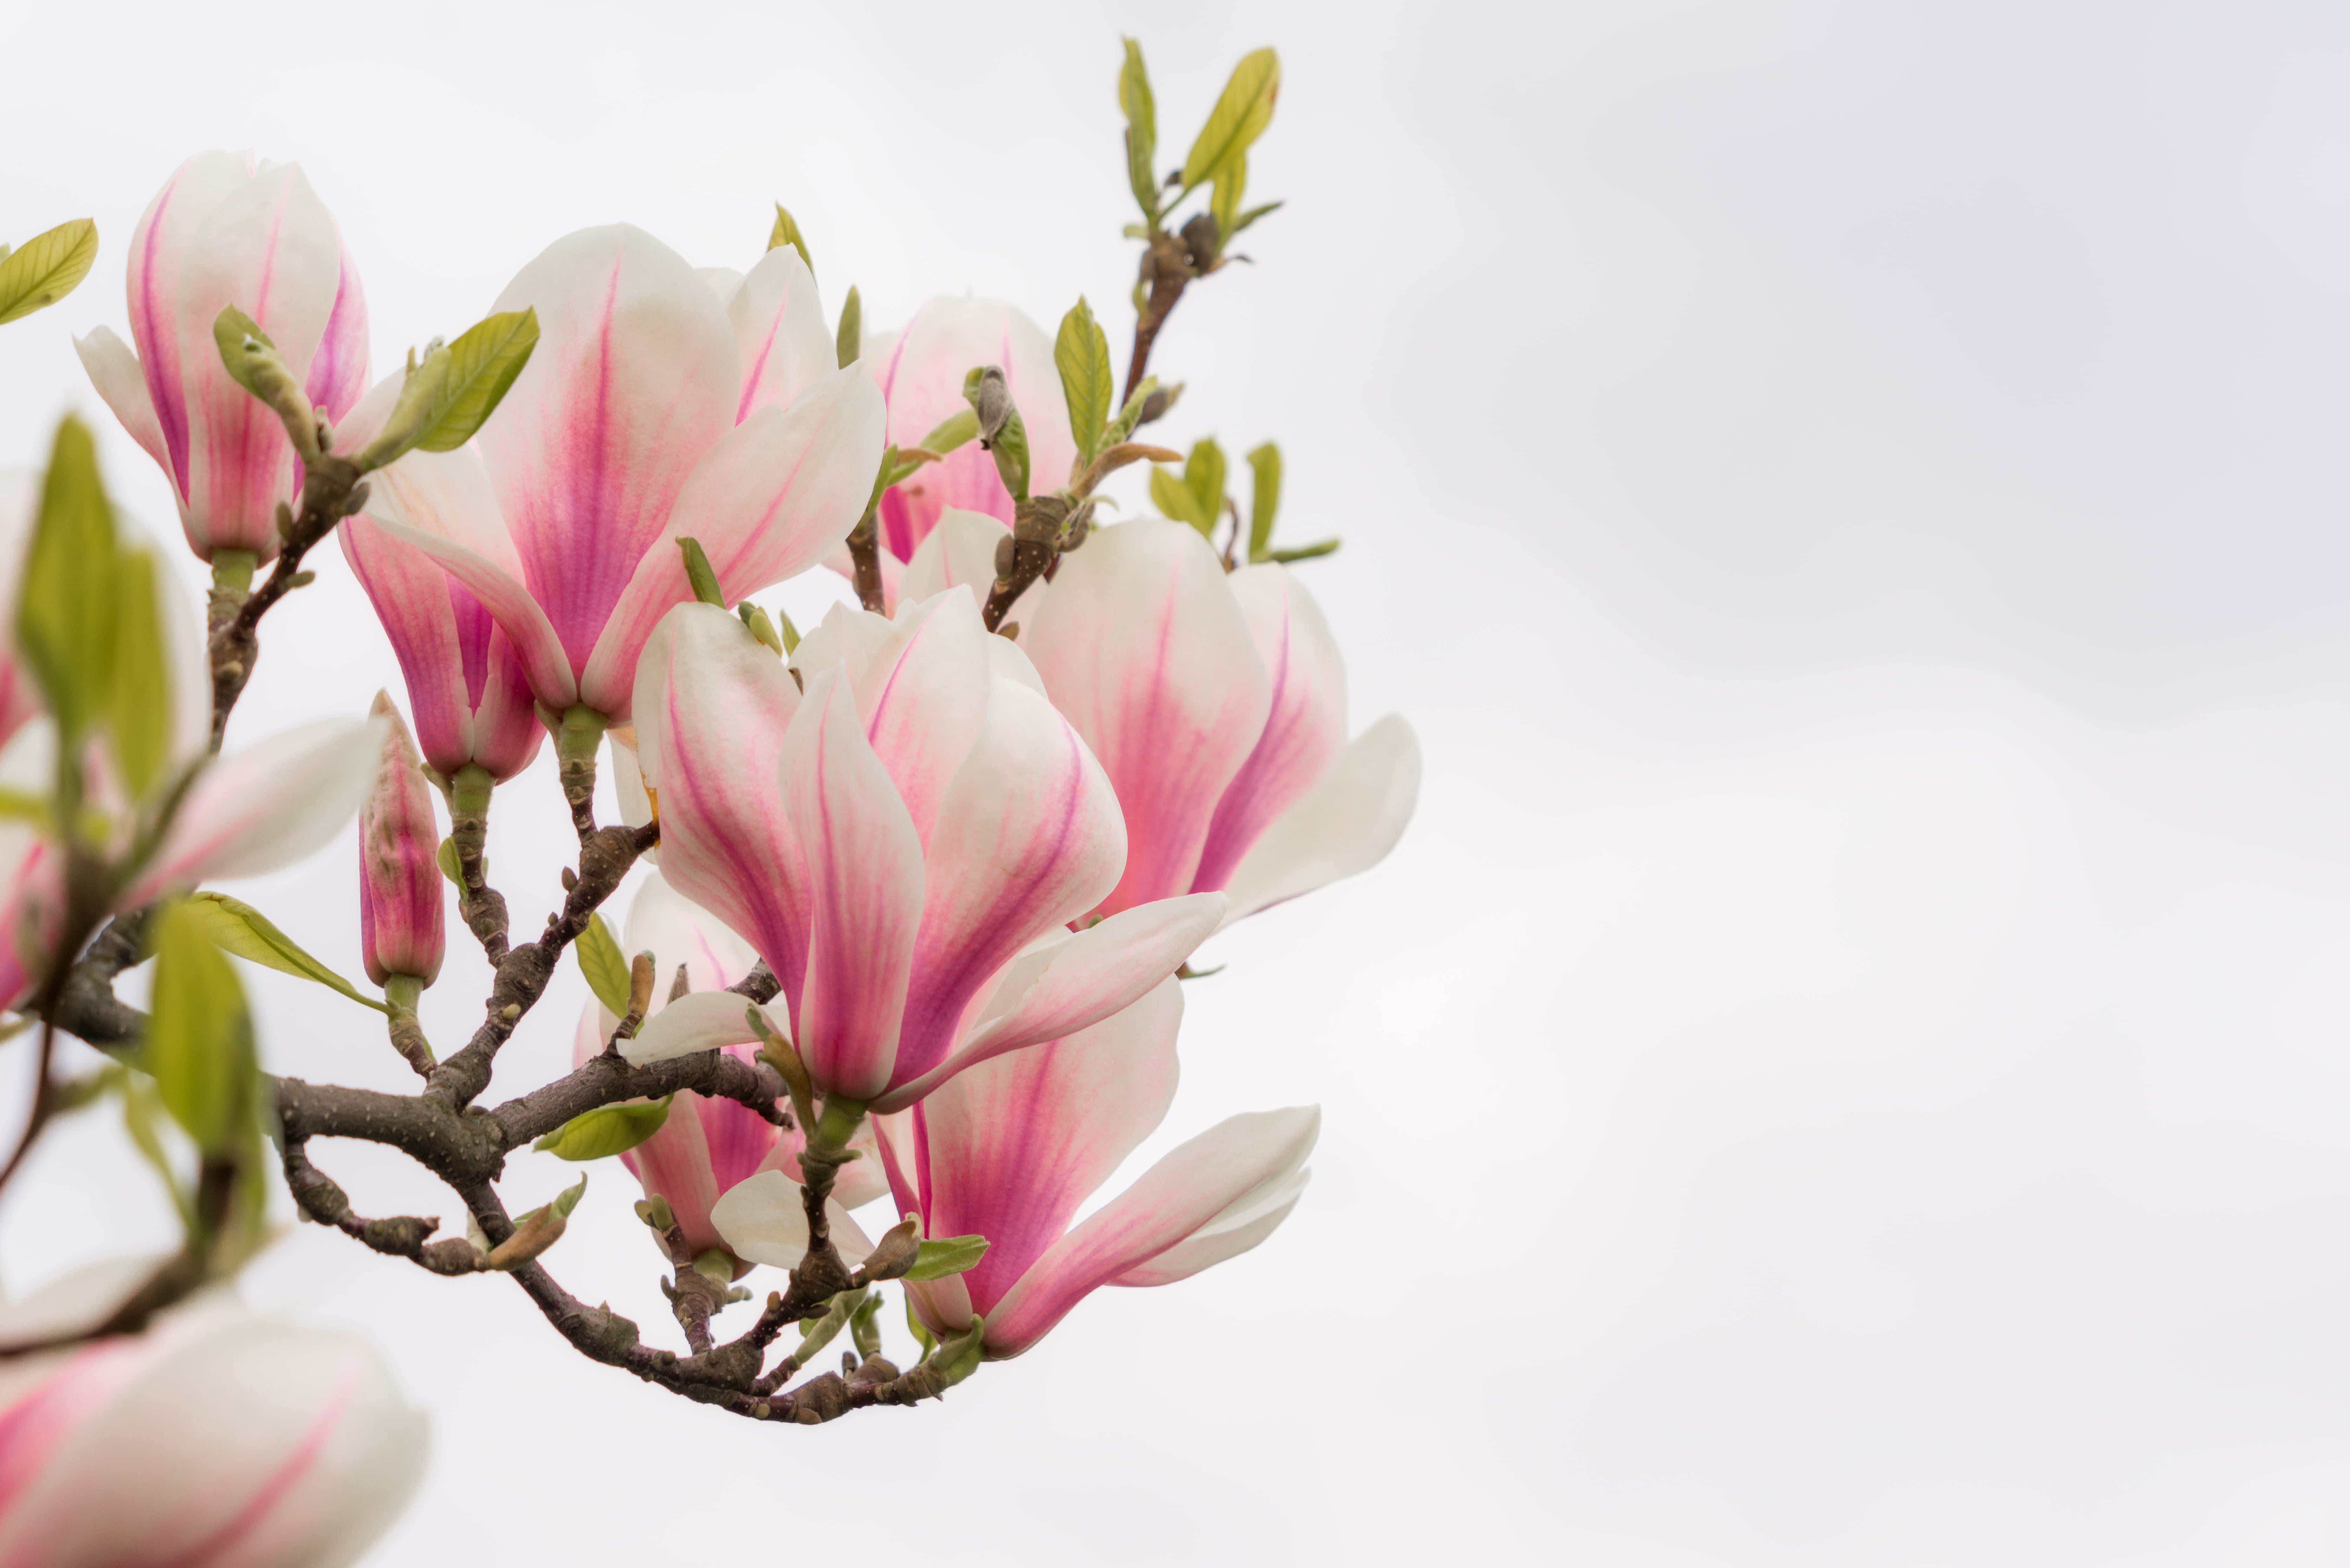 white-and-pink petaled flowers, branch, Magnolia, prague  spring